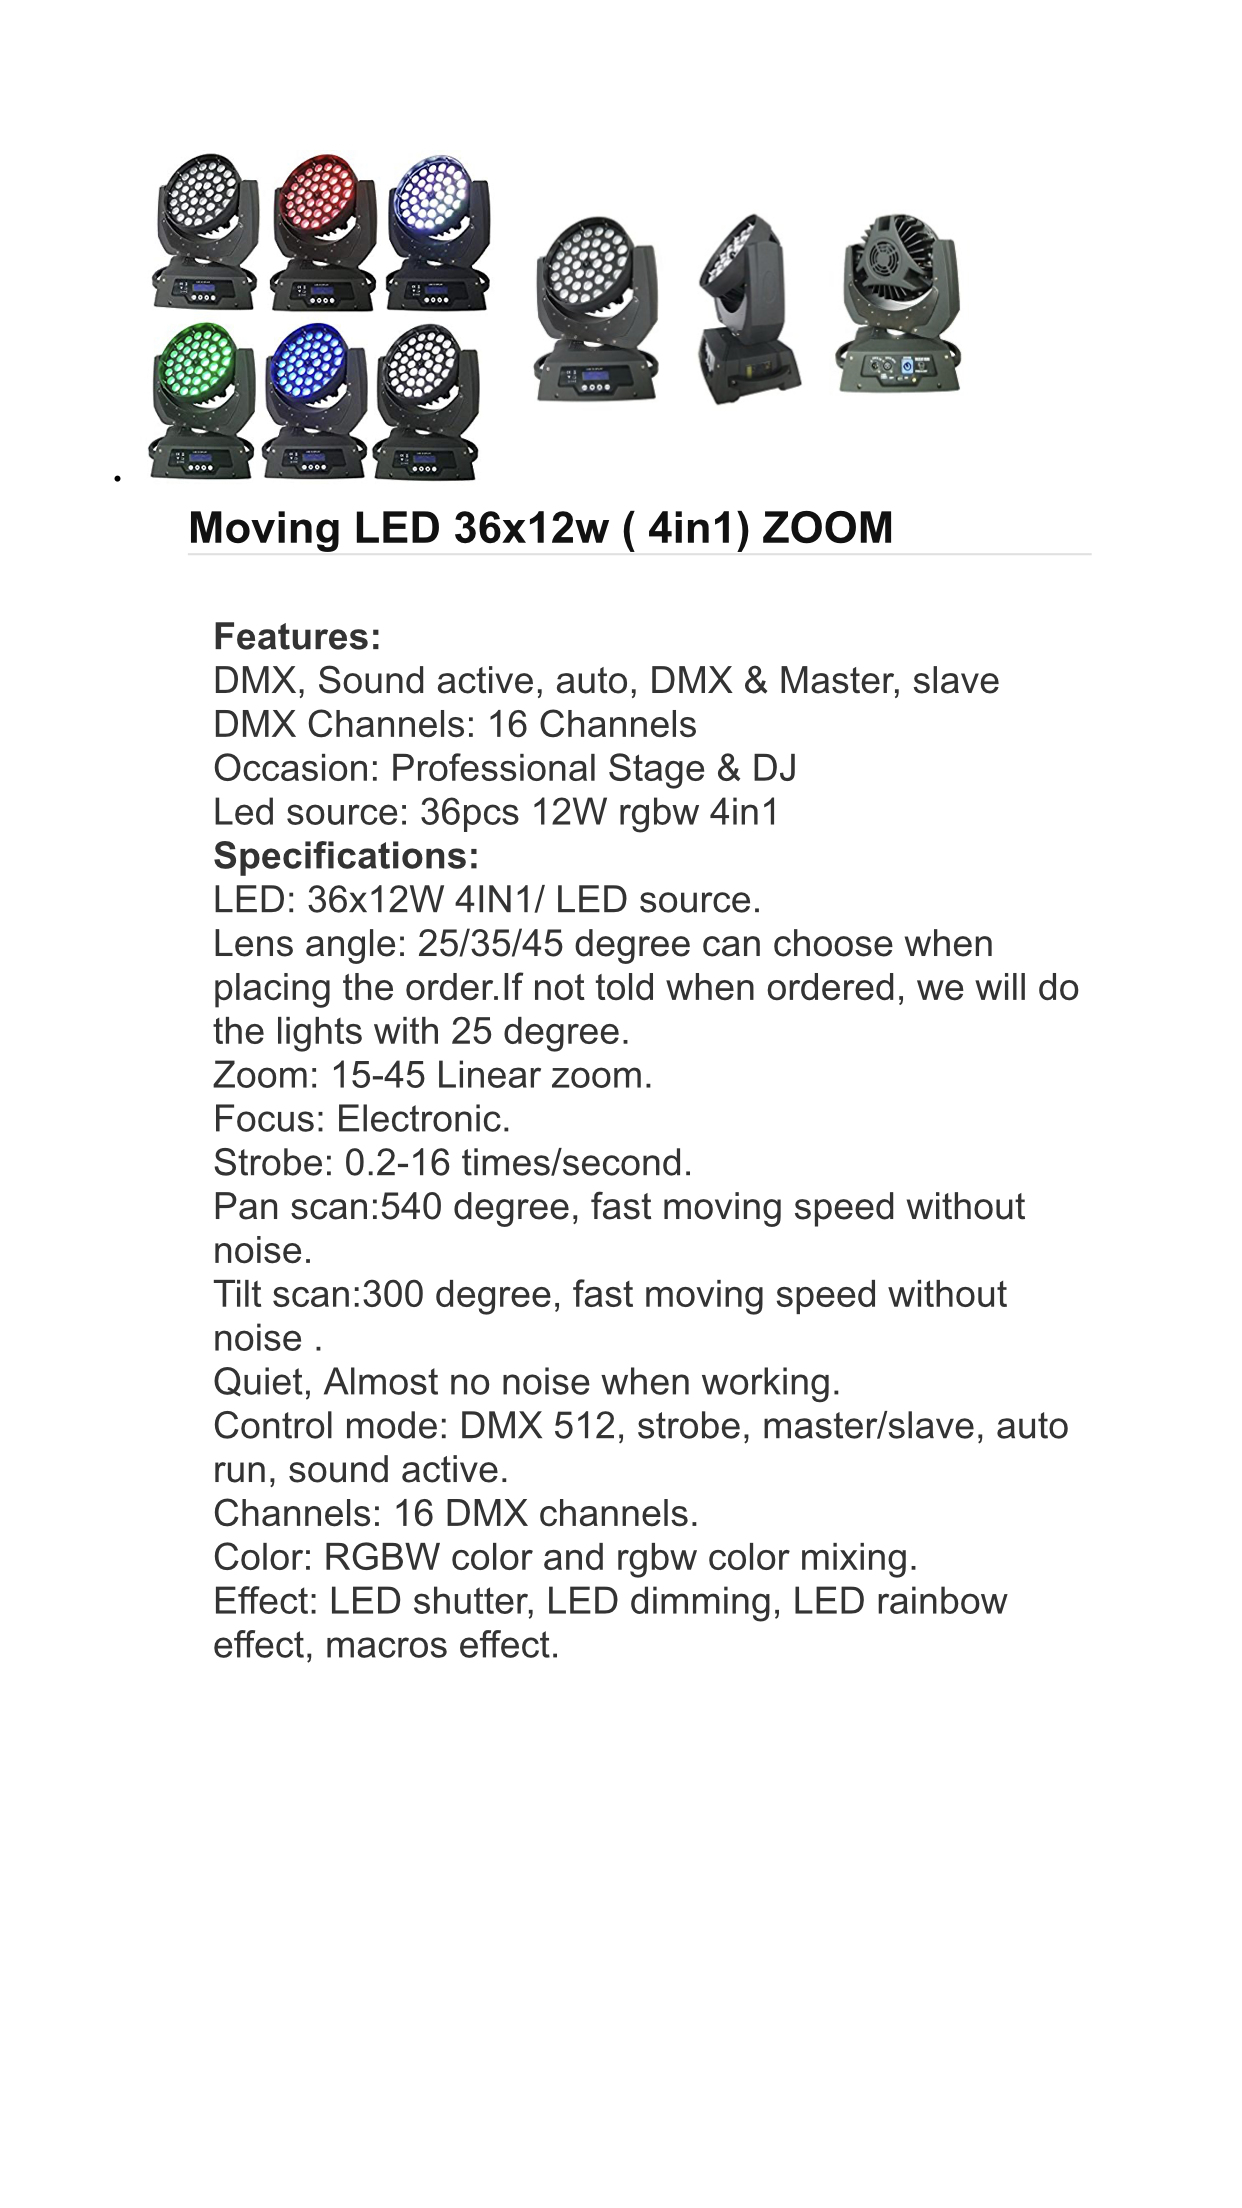 Moving LED 36x12w (4in1) ZOOM